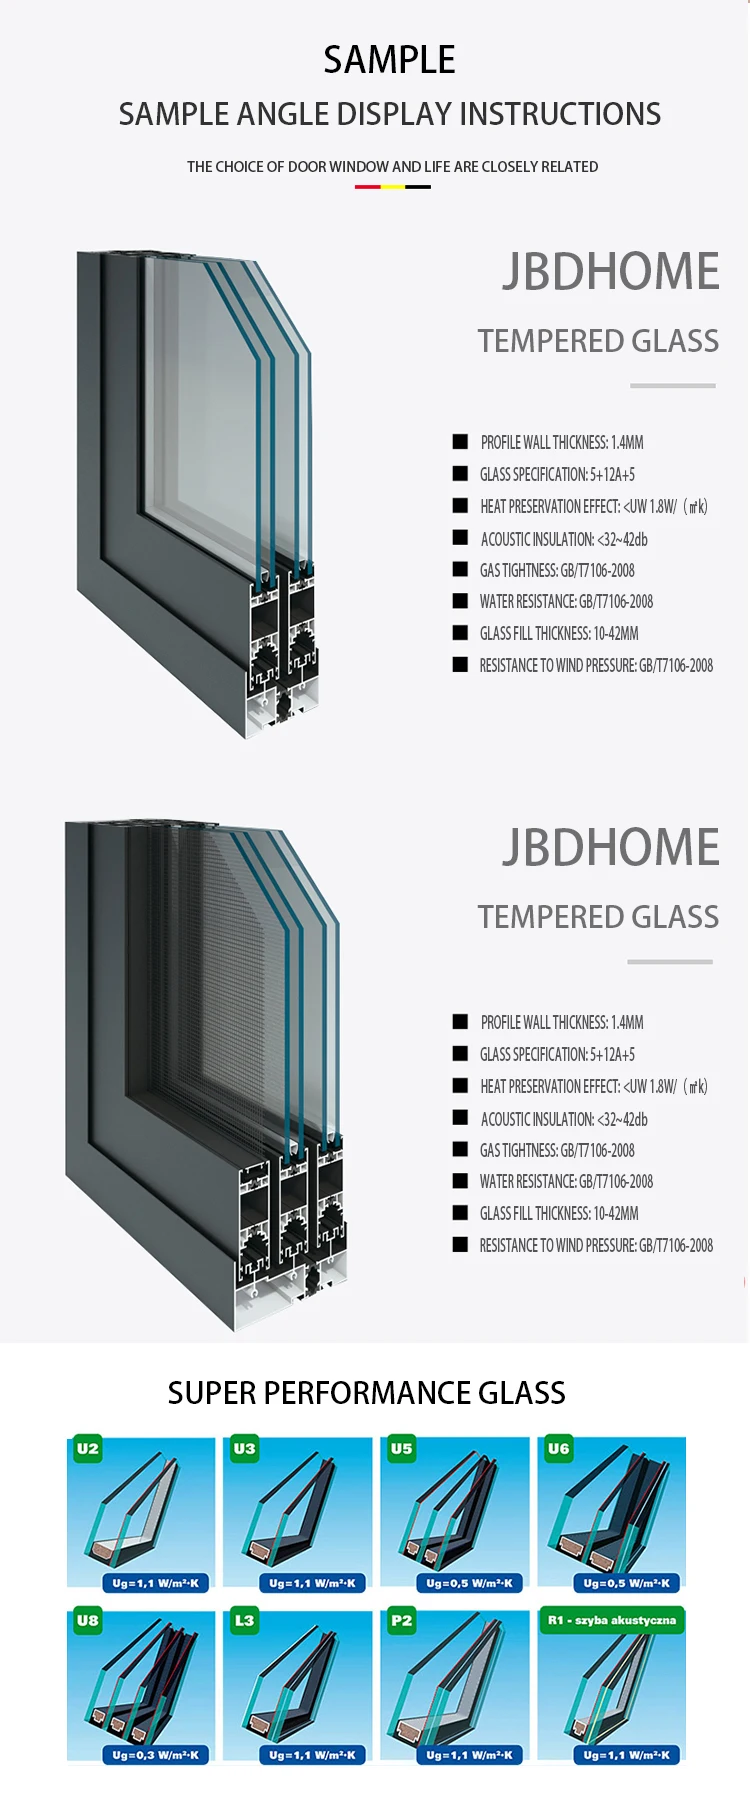 Double glazed insulated windows prices louver vertical fixed aluminum jalousie windows